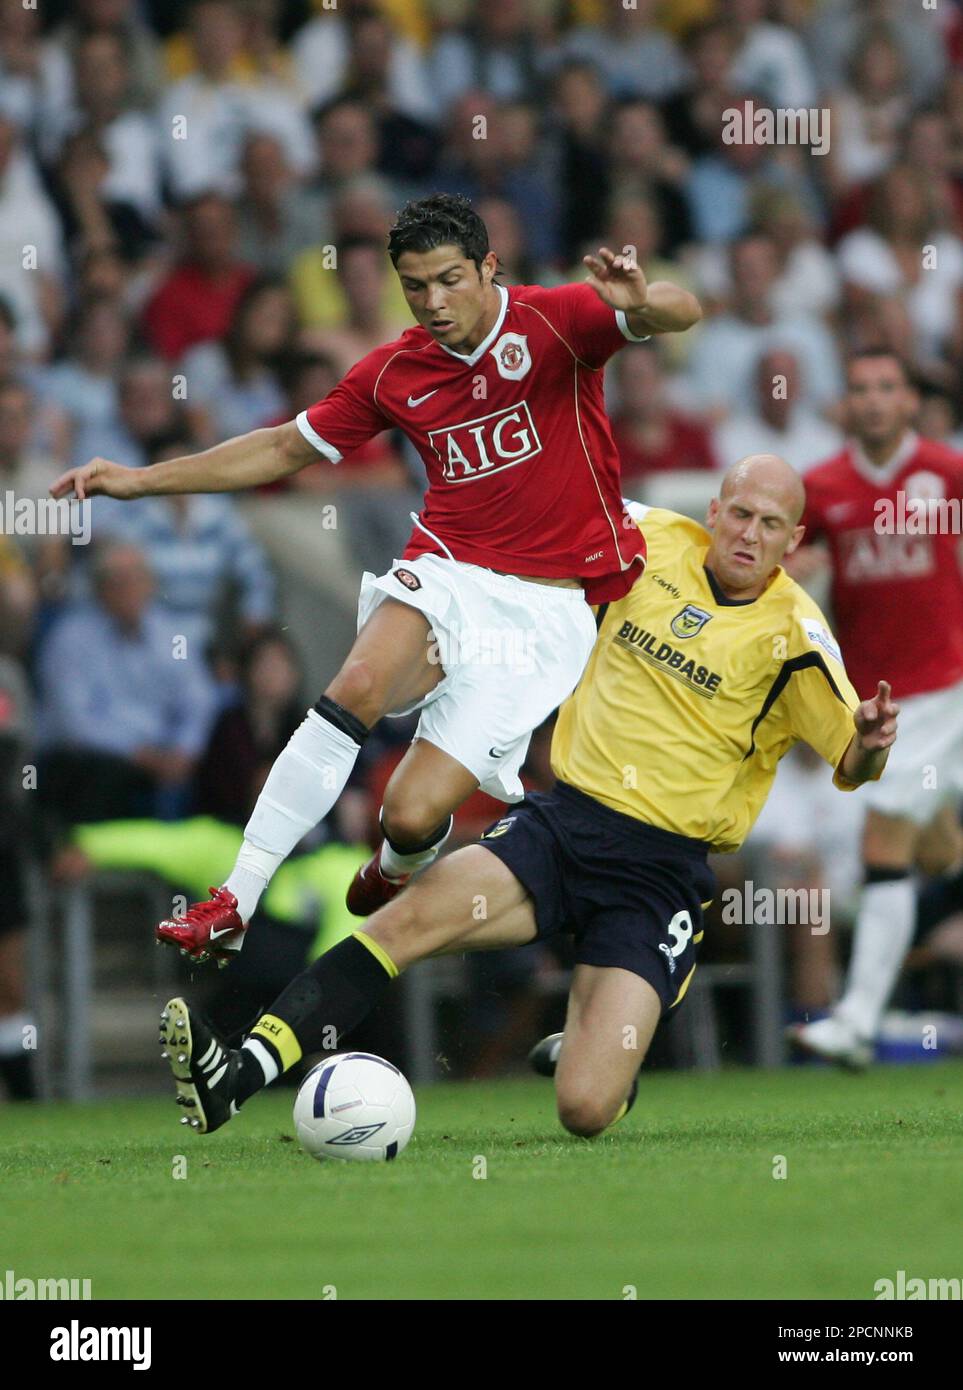 Manchester United's Cristiano Ronaldo jumps over a tackle by Oxford United  Eddie Hutchinson during their friendly pre-season soccer match at Kassam  Stadium in Oxford, England, Tuesday, Aug 8, 2006. (AP Photo/Sang Tan